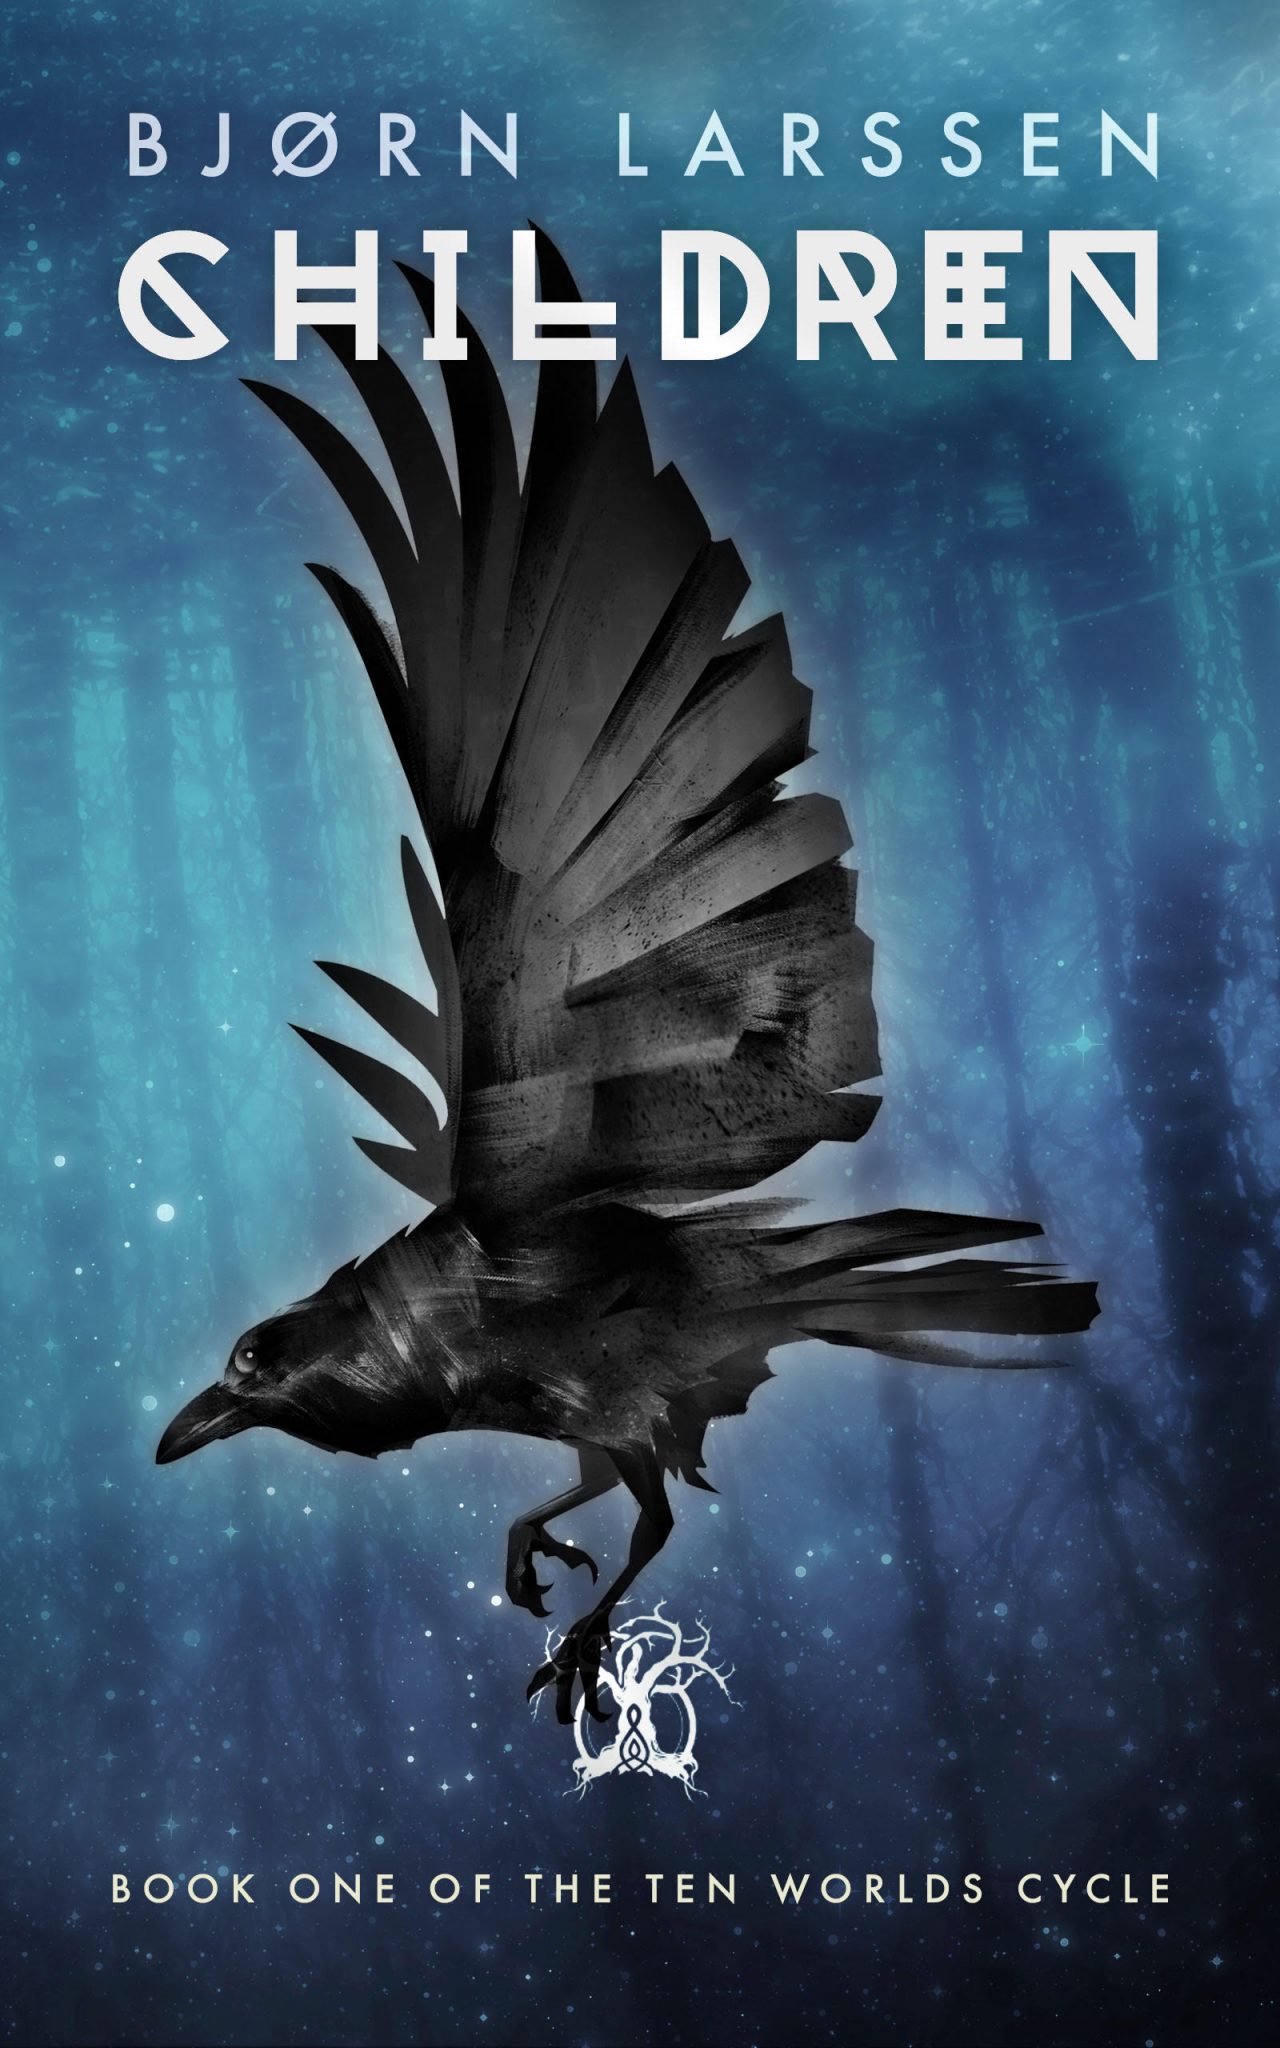 Cover for Children by Bjorn Larssen. A blue, dreamy background where we can see a forest in the backdrop. In the middle, a raven, wings open, imposing.